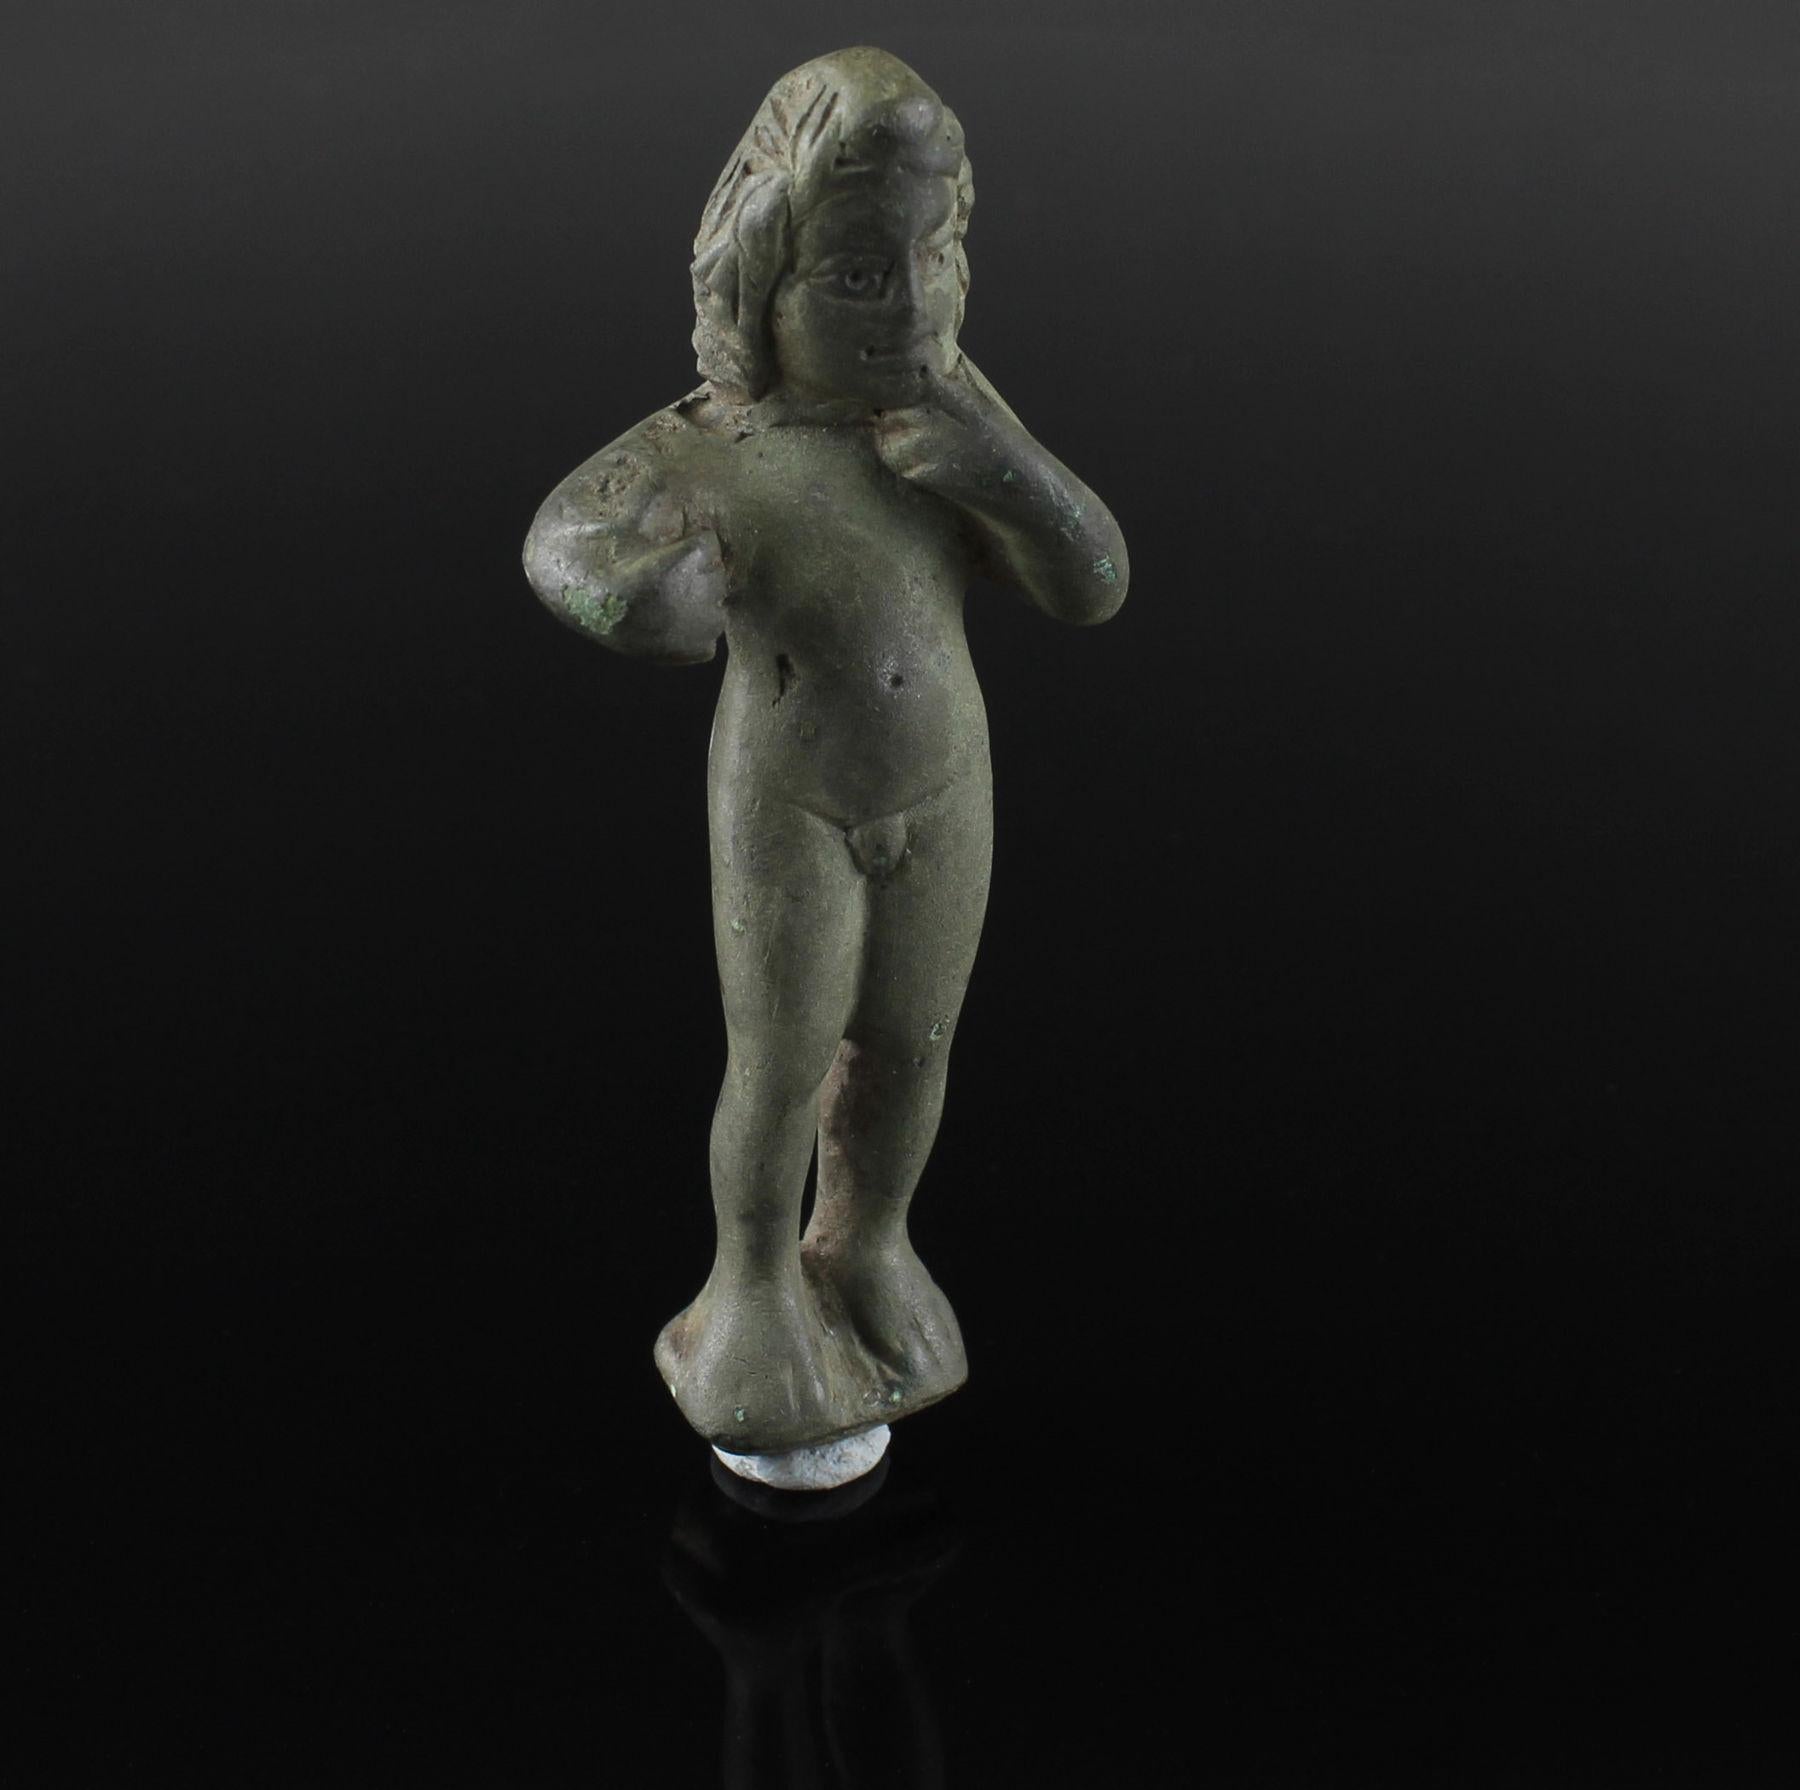 ITEM: Statuette of Eros-Harpocrates
MATERIAL: Bronze
CULTURE: Roman
PERIOD: 1st Century B.C – 1st Century A.D
DIMENSIONS: 82 mm x 31 mm
CONDITION: Good condition
PROVENANCE: Ex American private collection, collected between 1980 – 1990

Comes with